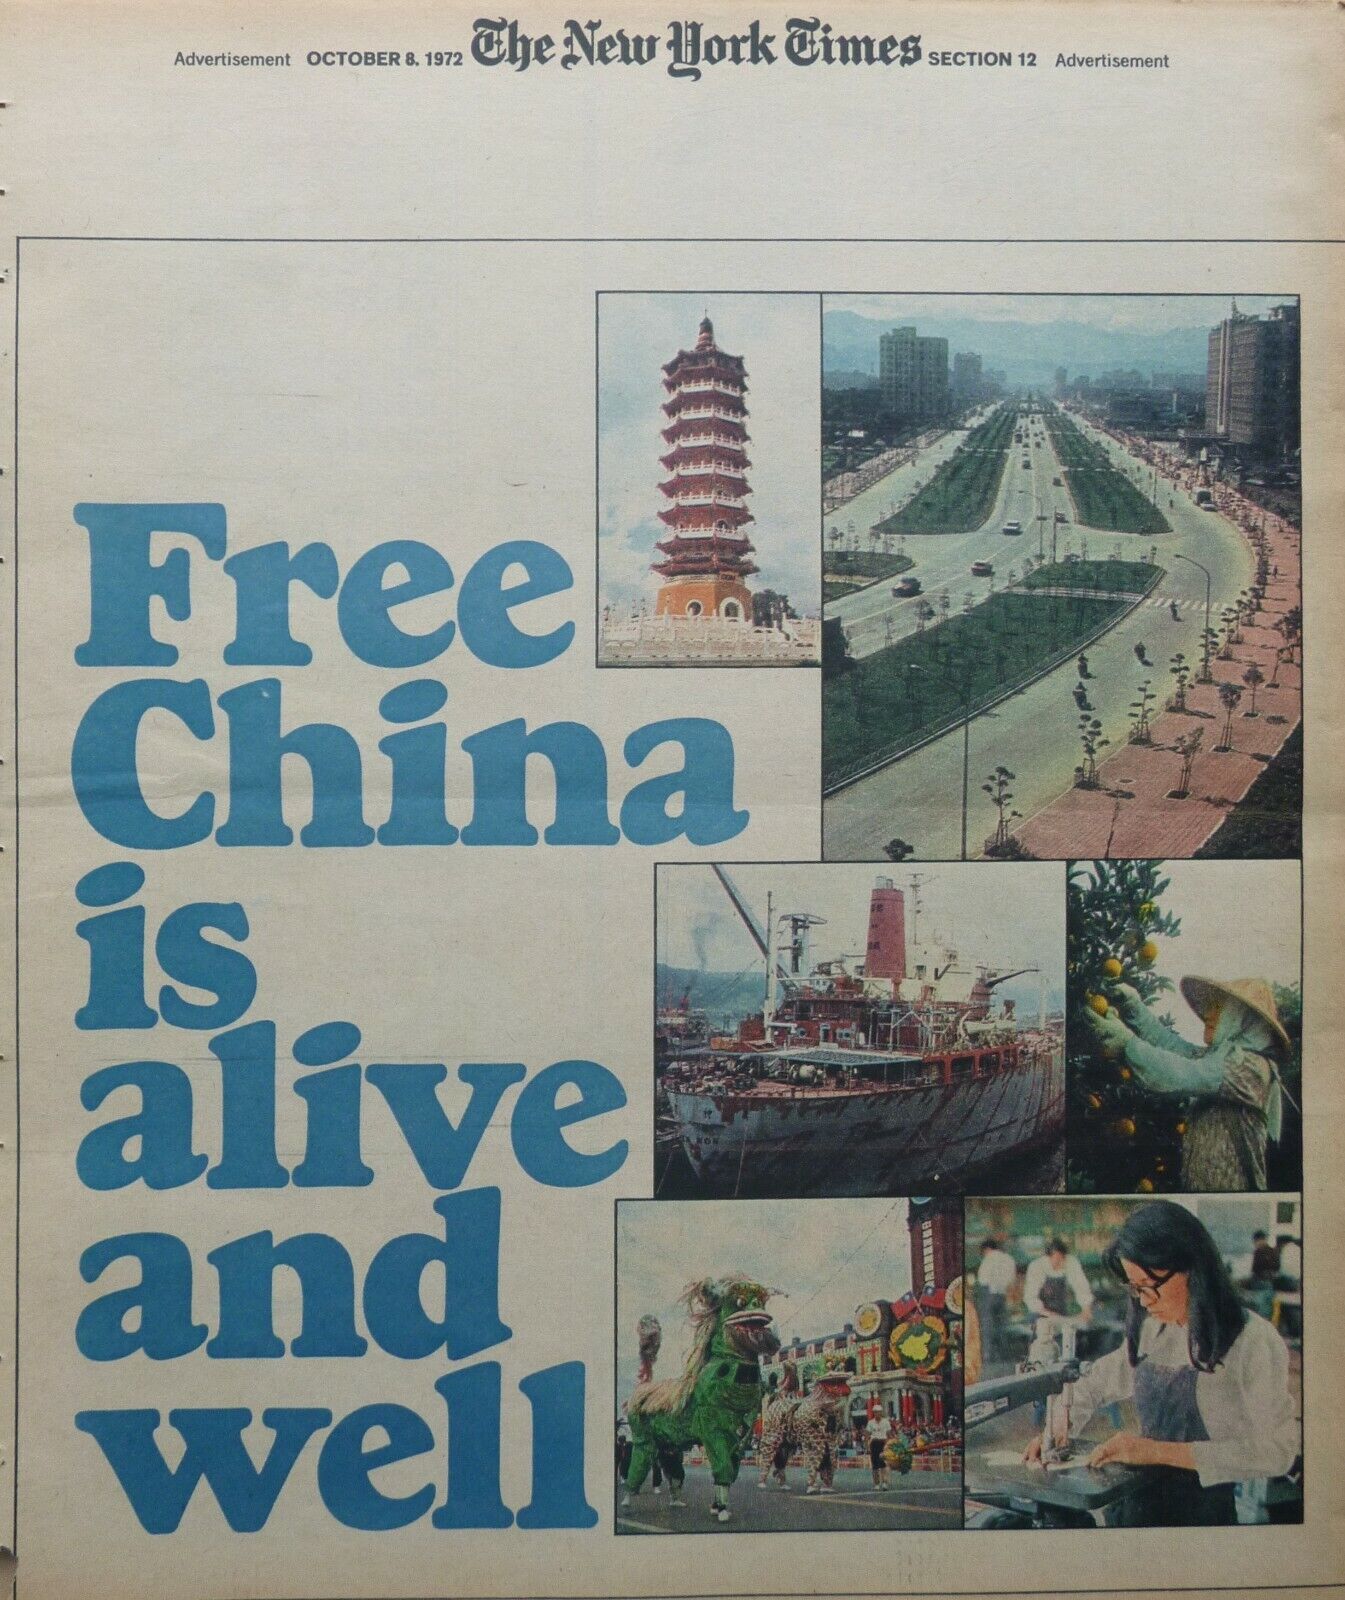 FREE CHINA SUPPLEMENT FOREIGN TRADE TAIWAN TAIPEI ART 1972 October 8 NY Times